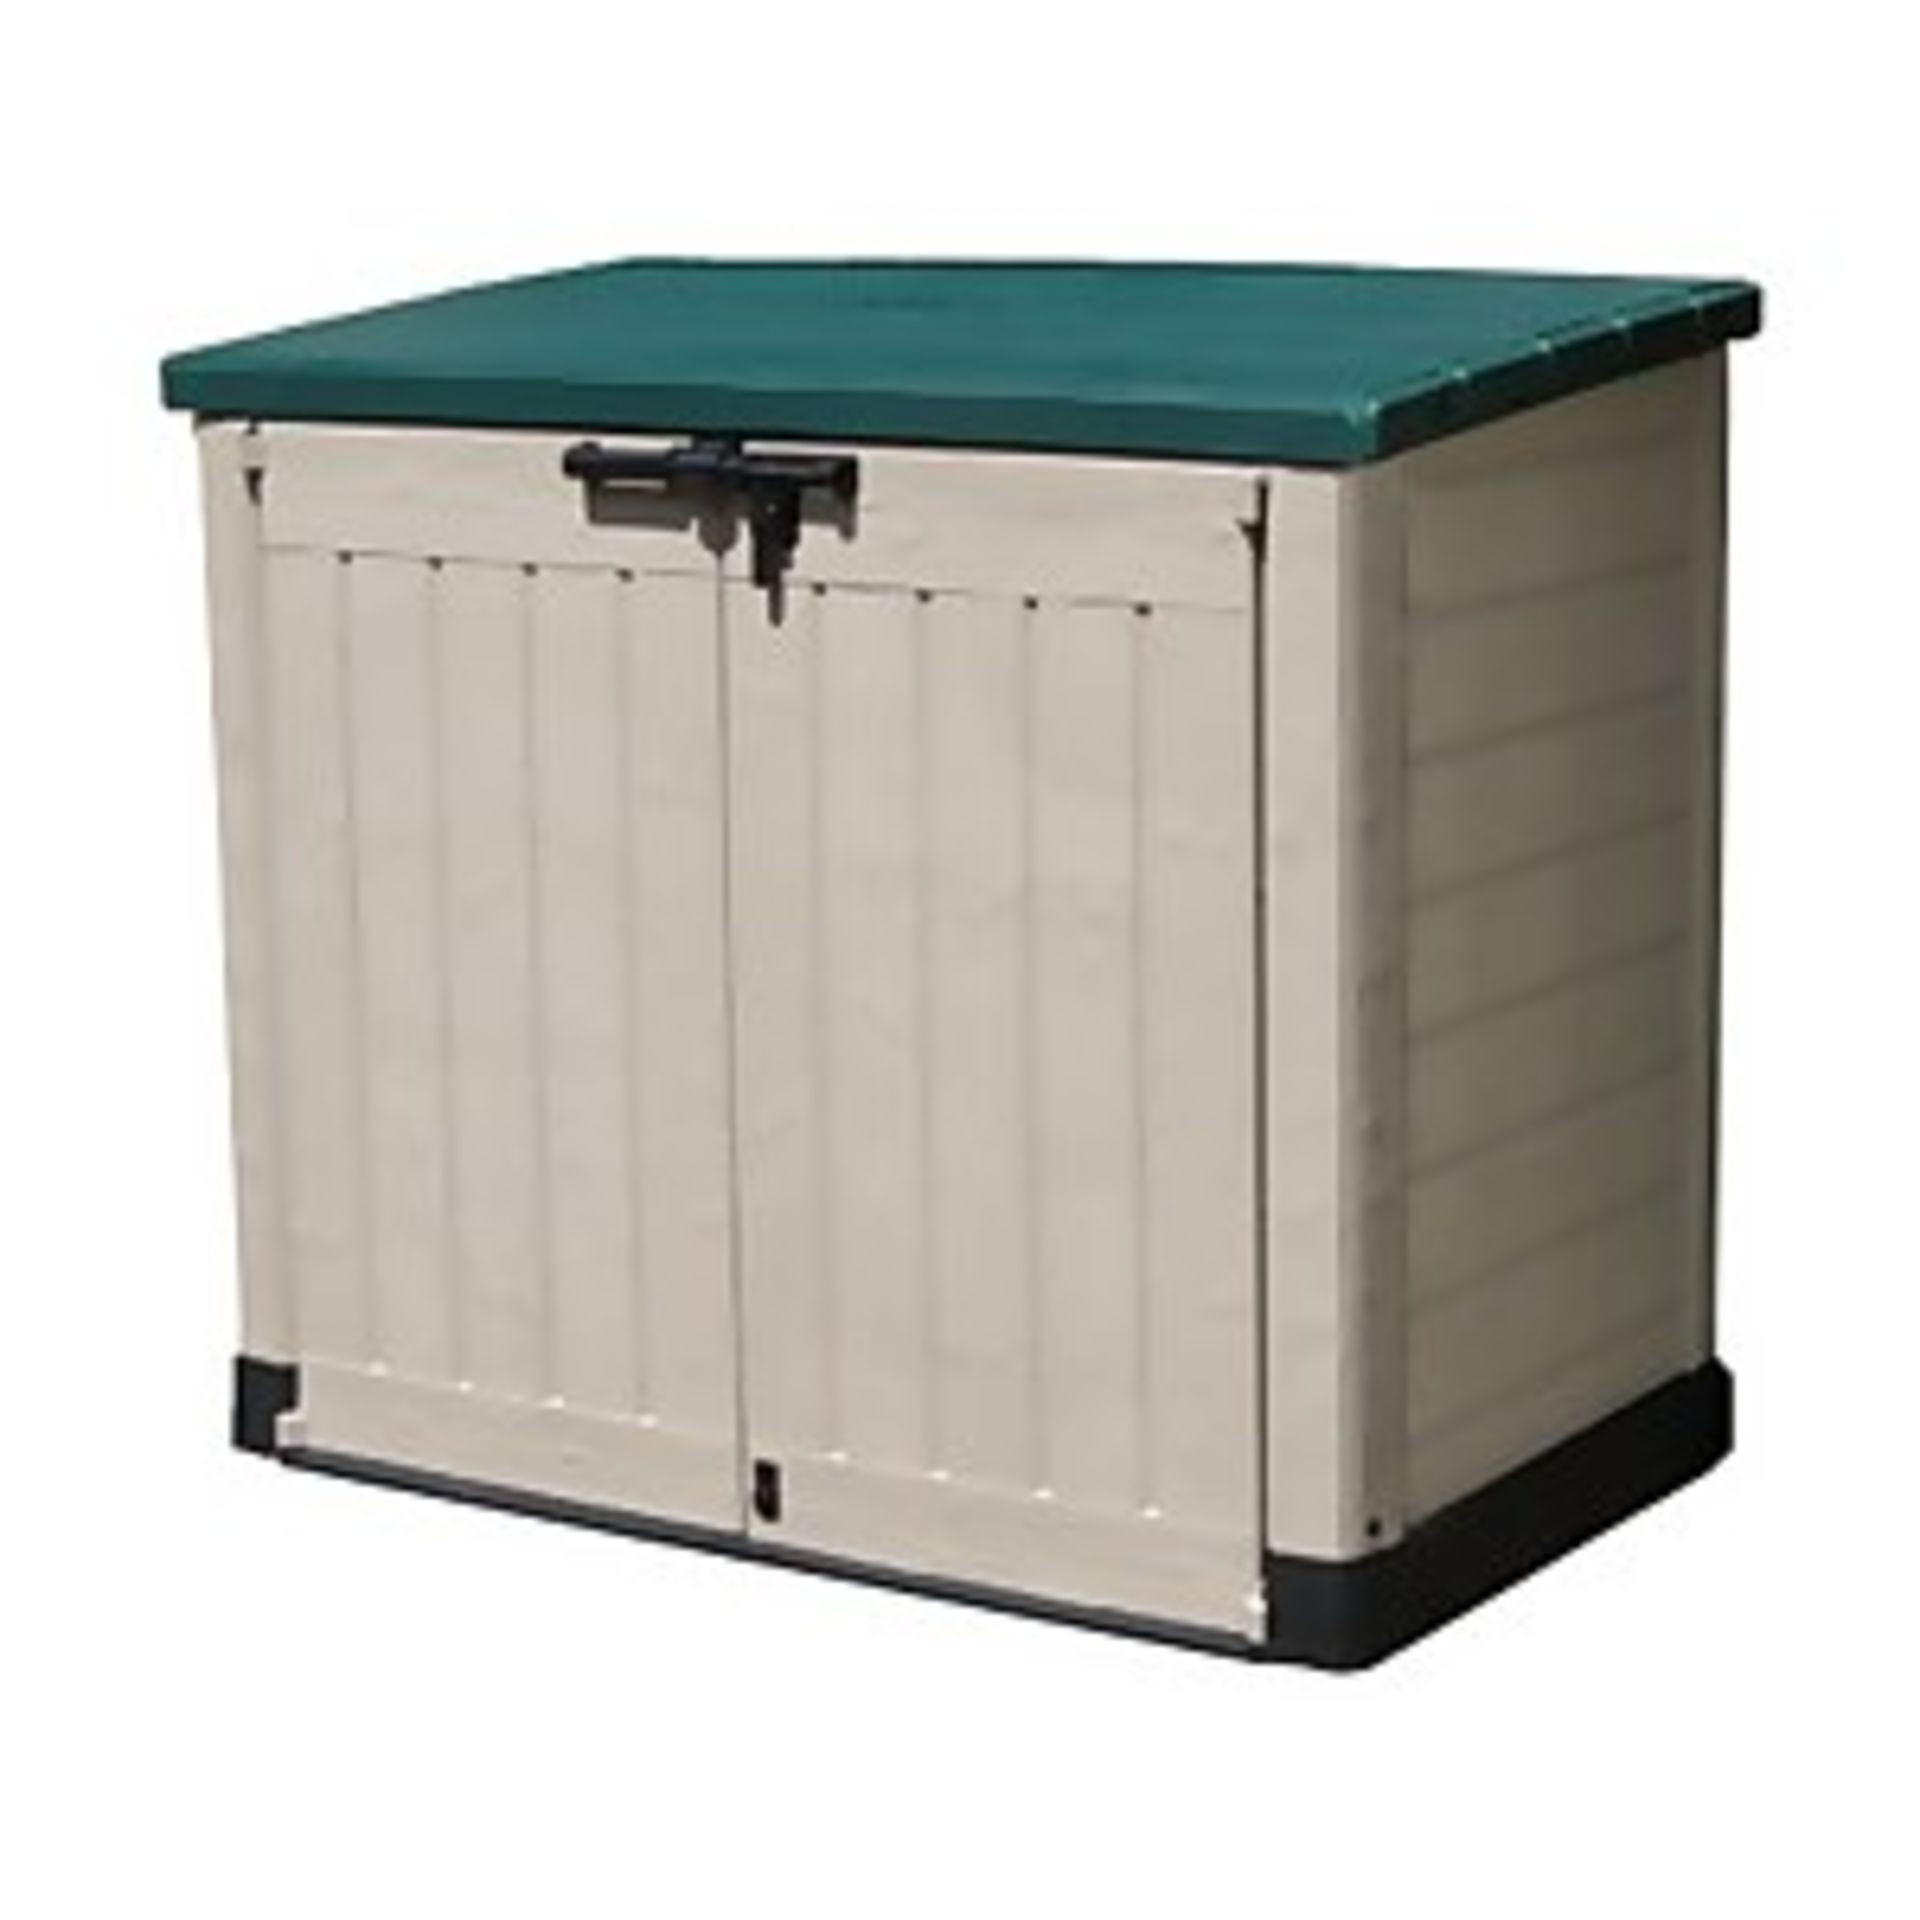 1x Keter Store It Out Ace (145.5 x 82 x 123cm) RRP £145. (Packaging Open, Unsure If Unit Is Complet